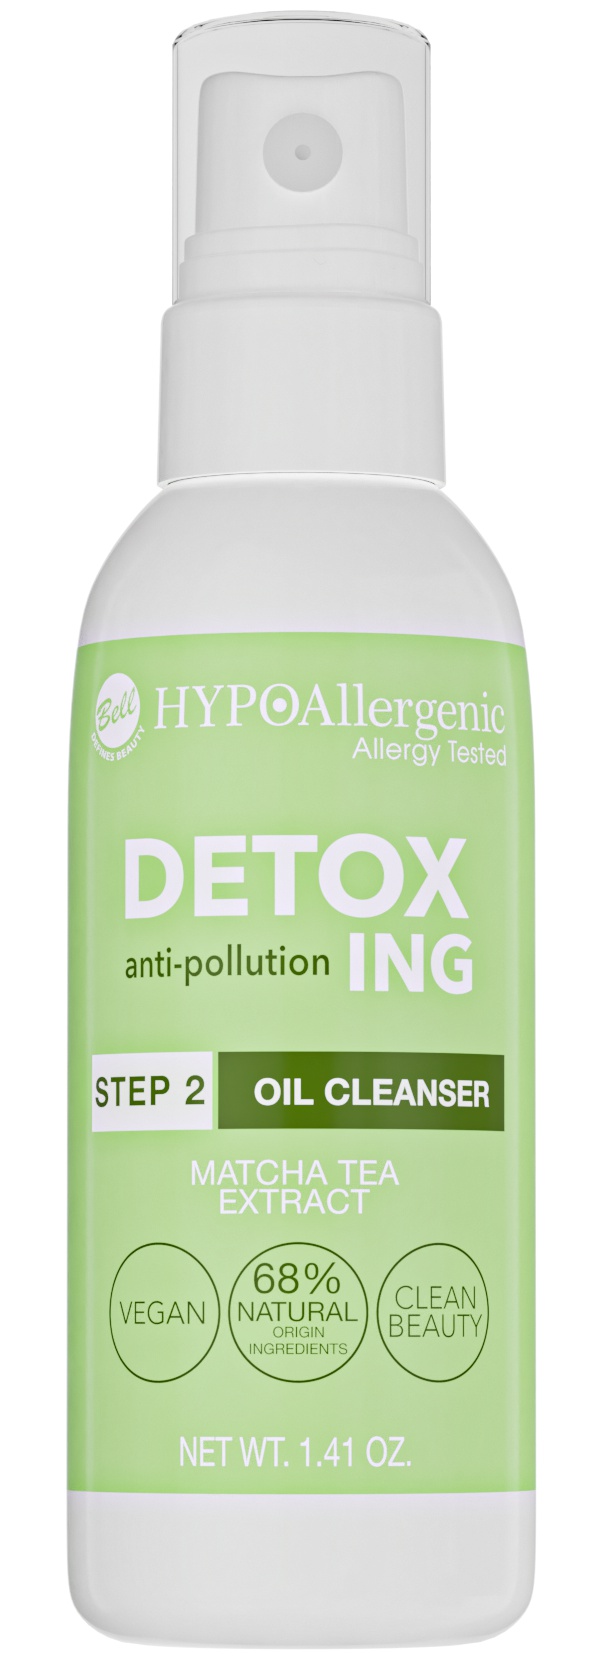 Bell HYPOAllergenic Detoxing Anti-Pollution Oil Cleanser